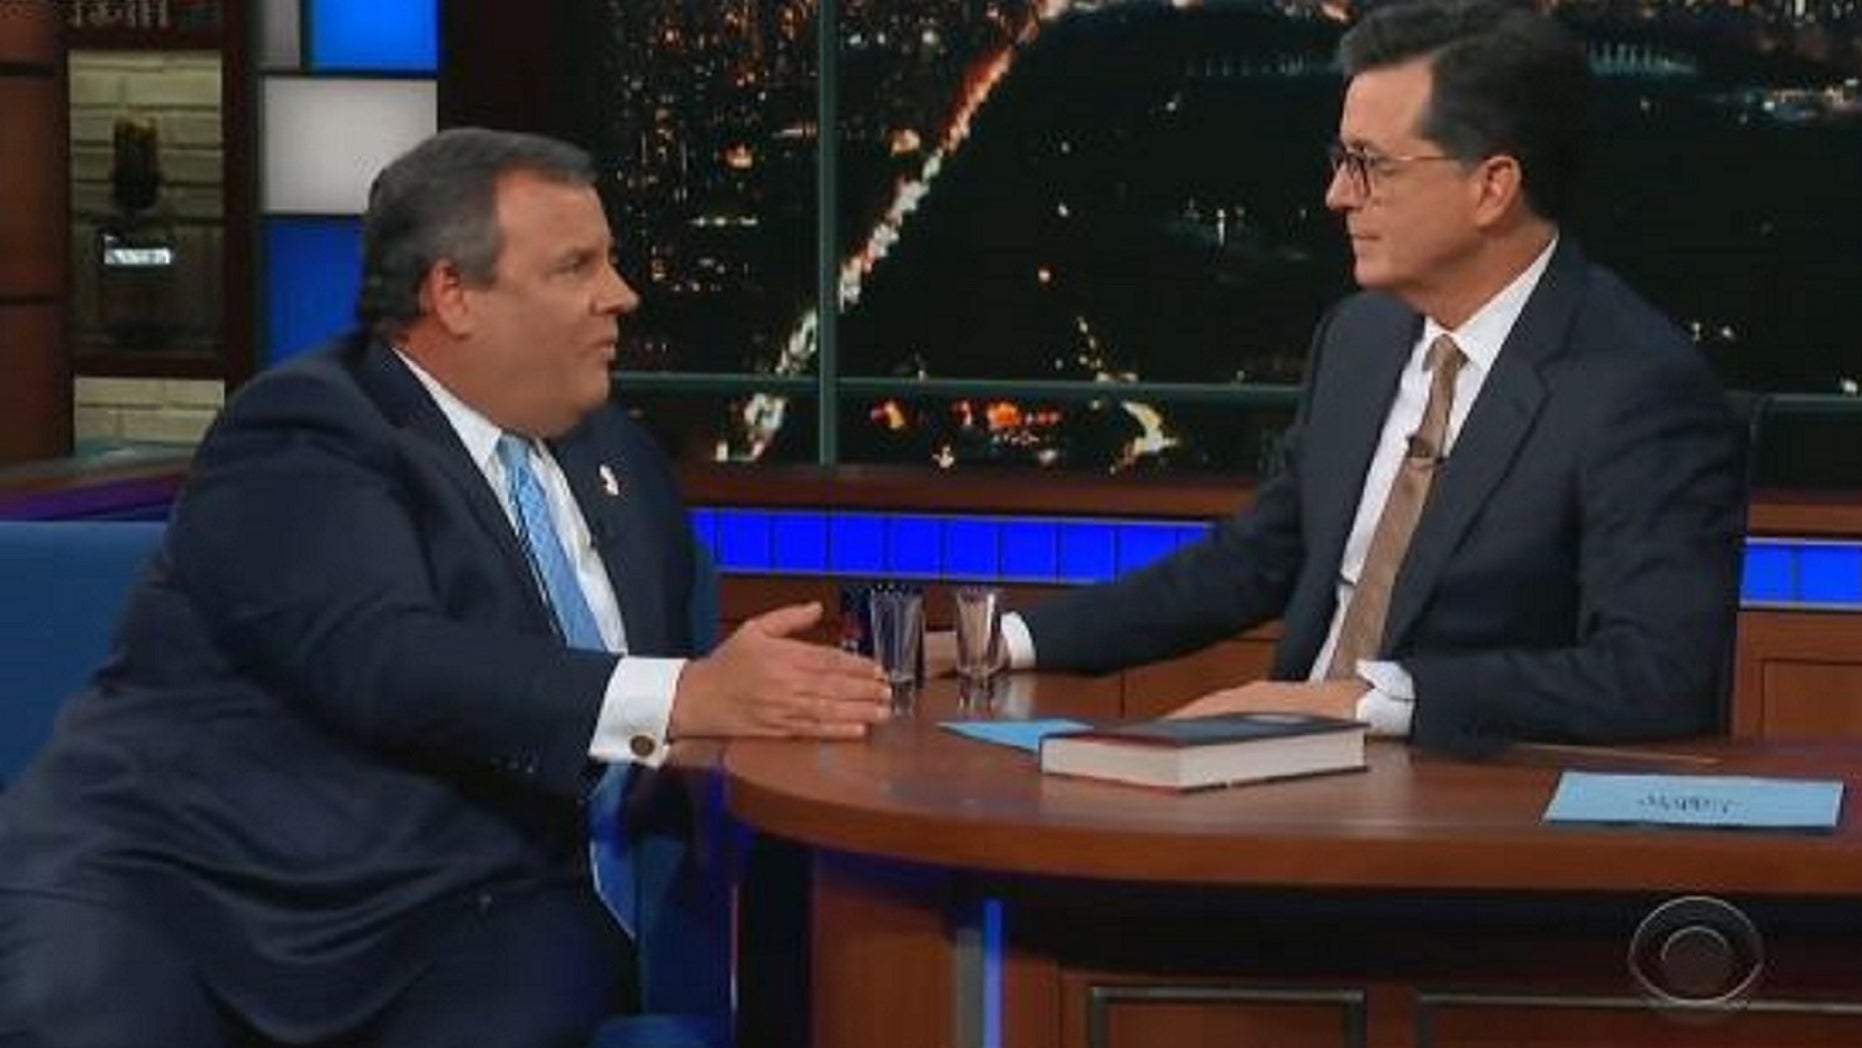 Chris Christie tells Colbert that he would have been a better president than Trump